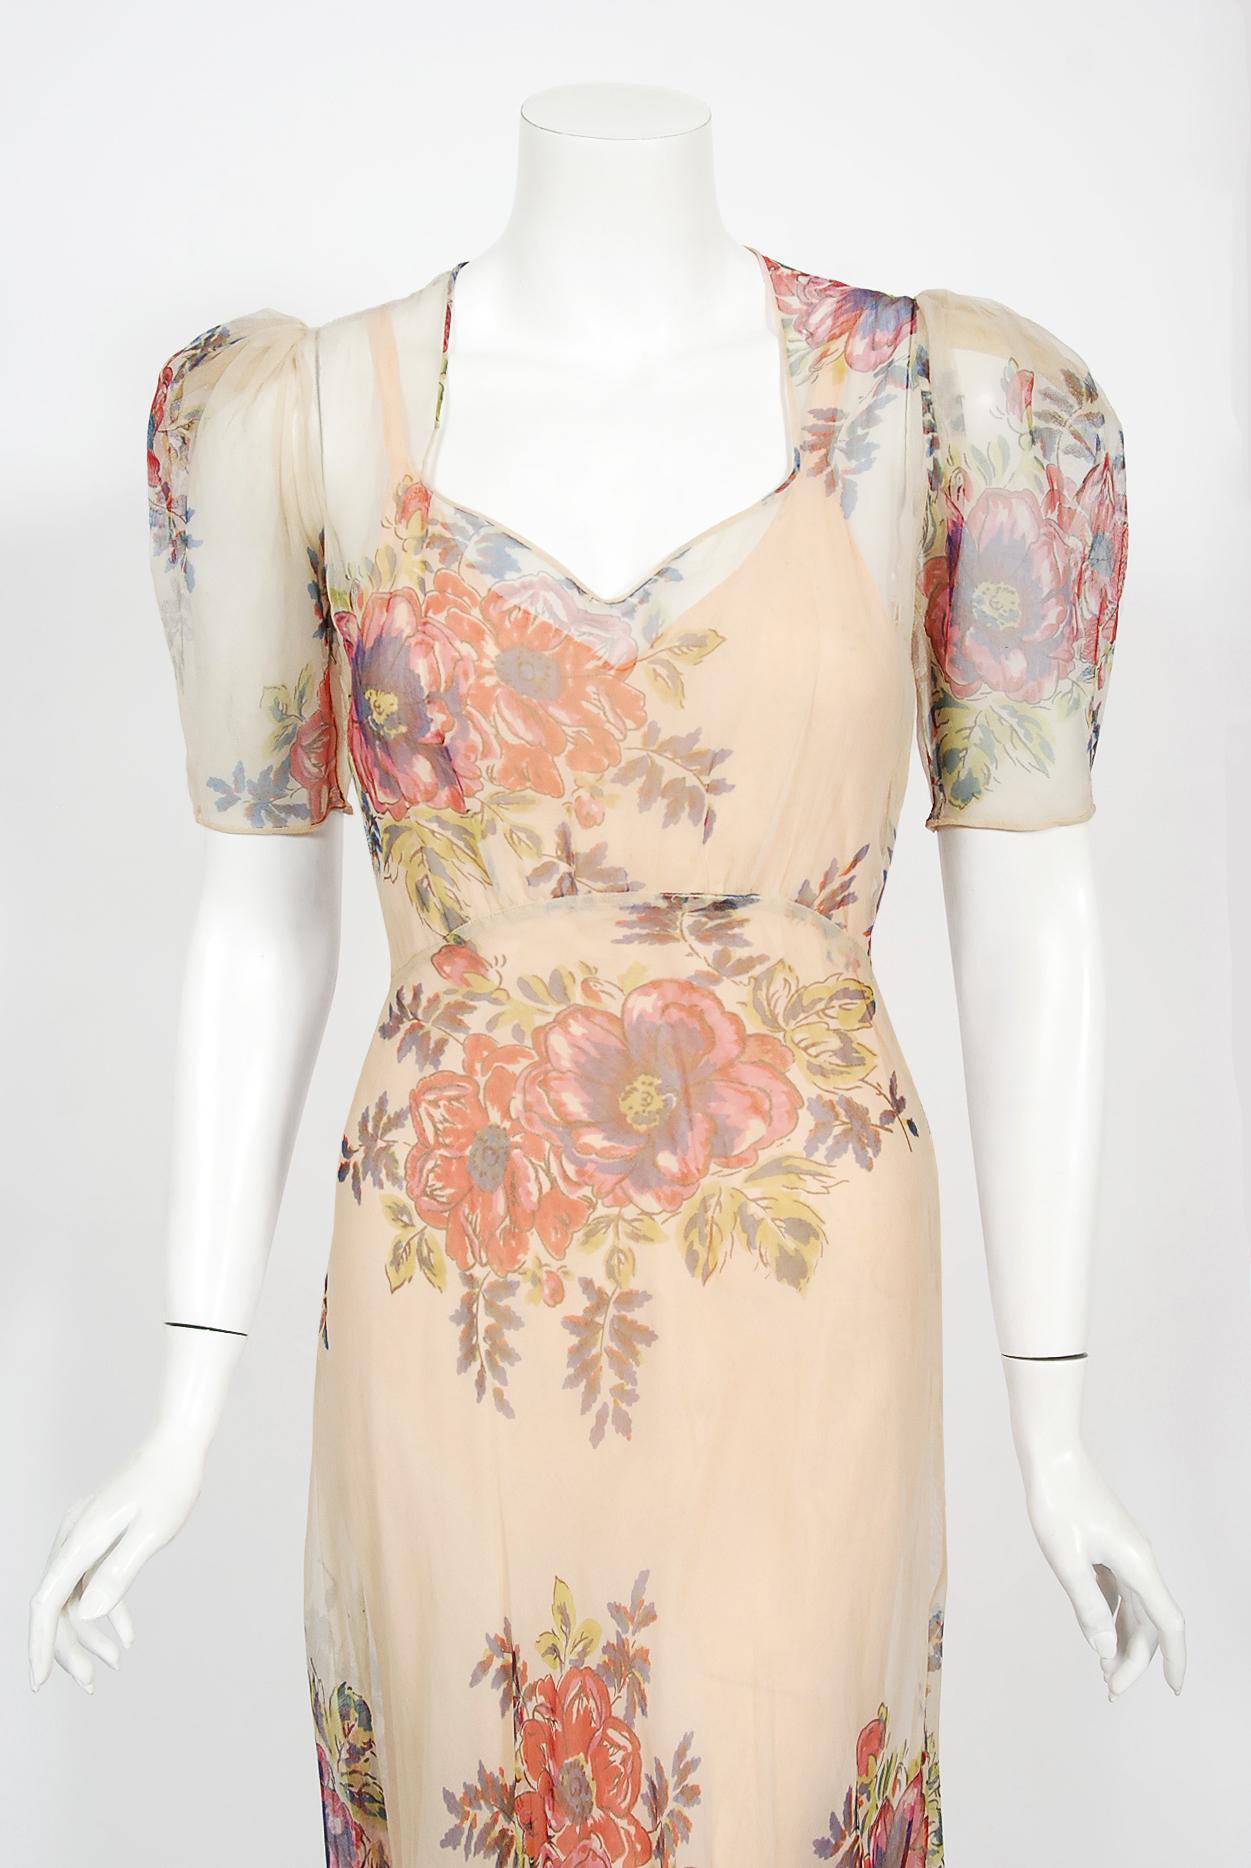 There are lots of lovely 1930's garments still around, but every once in a while I come across one that sets my heart a flutter! This is a simply beautiful 1930's colorful large-scale floral print sheer silk net gown with matching nude under slip.